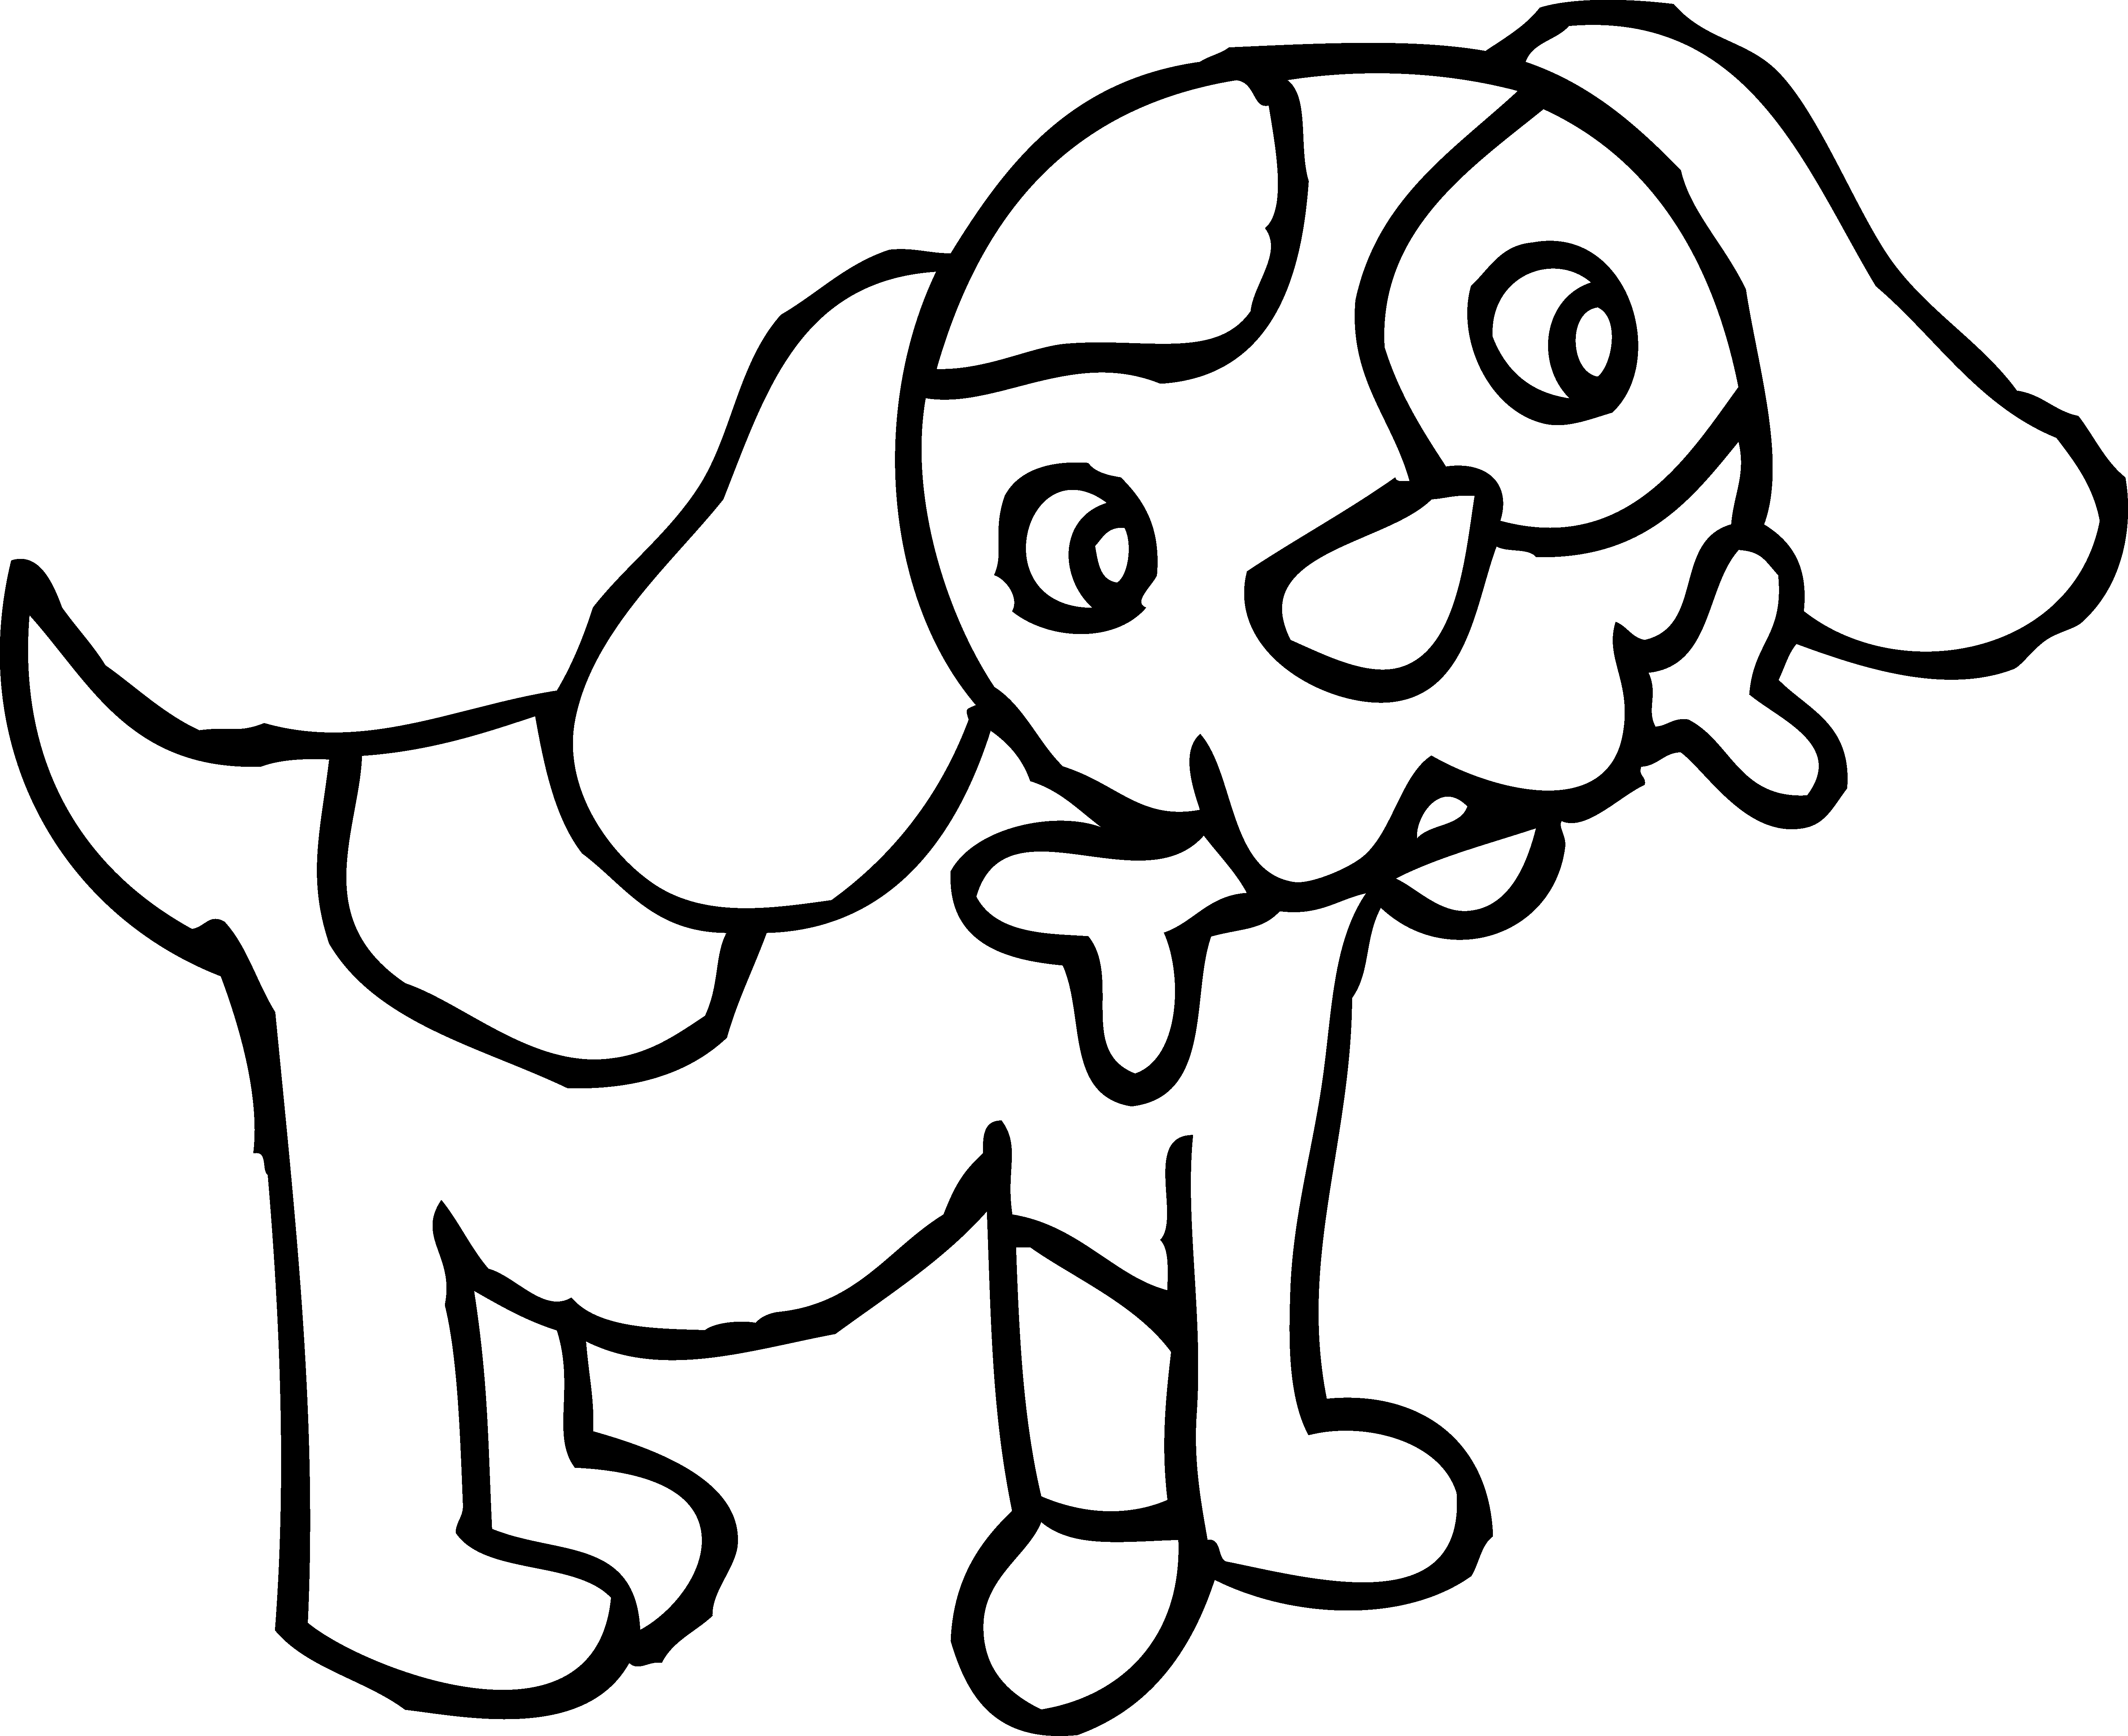 Pets clipart black and white #3